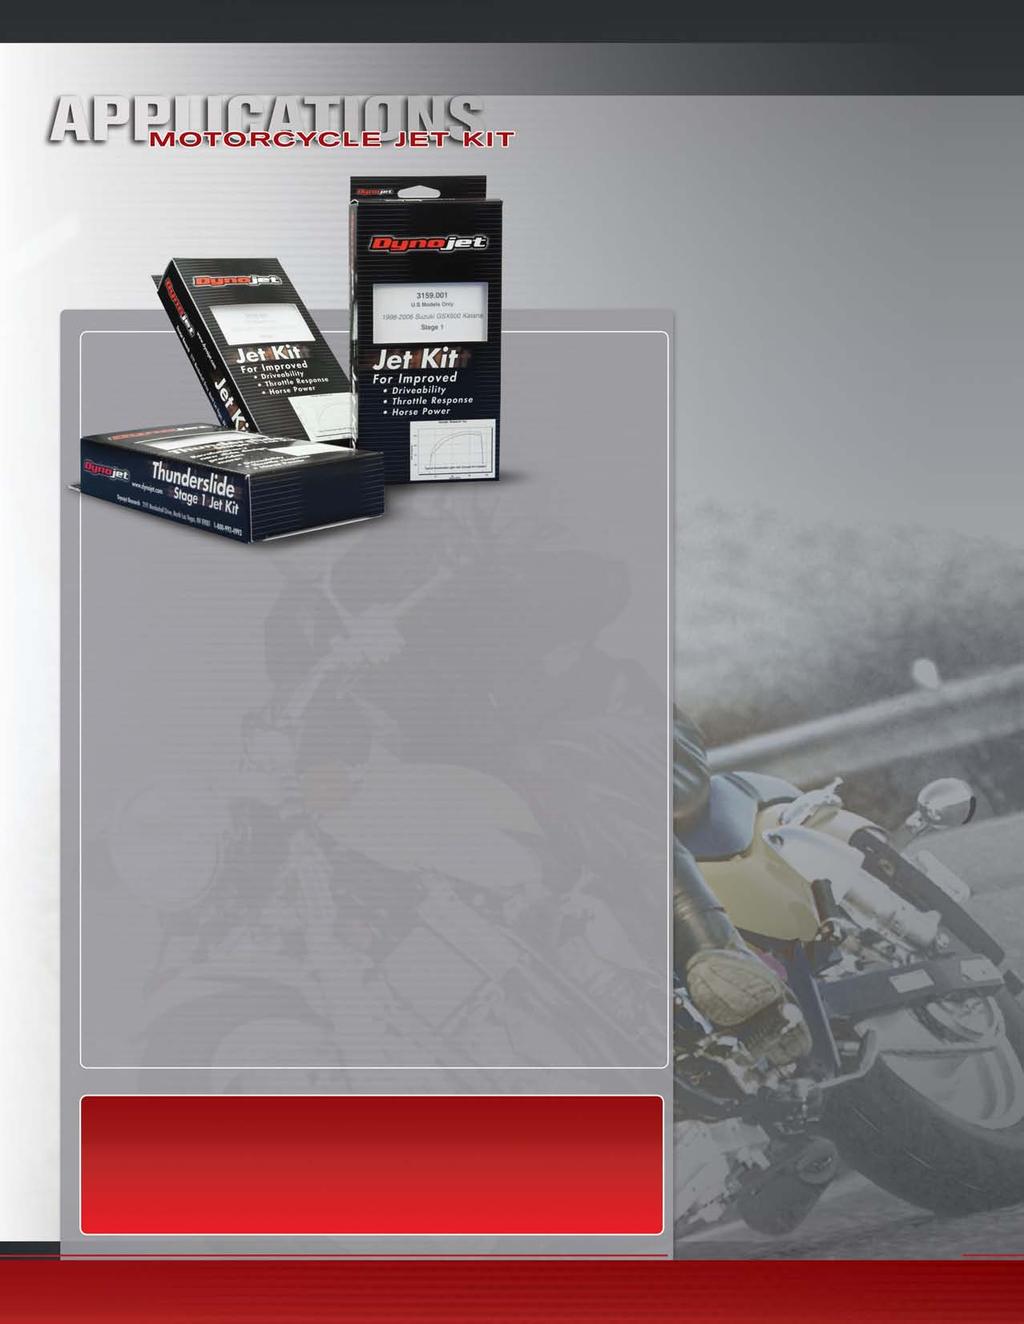 Stage 1 Kits Designed for motorcycles with a stock engine using the stock airbox, air filter, and stock or aftermarket pipe.